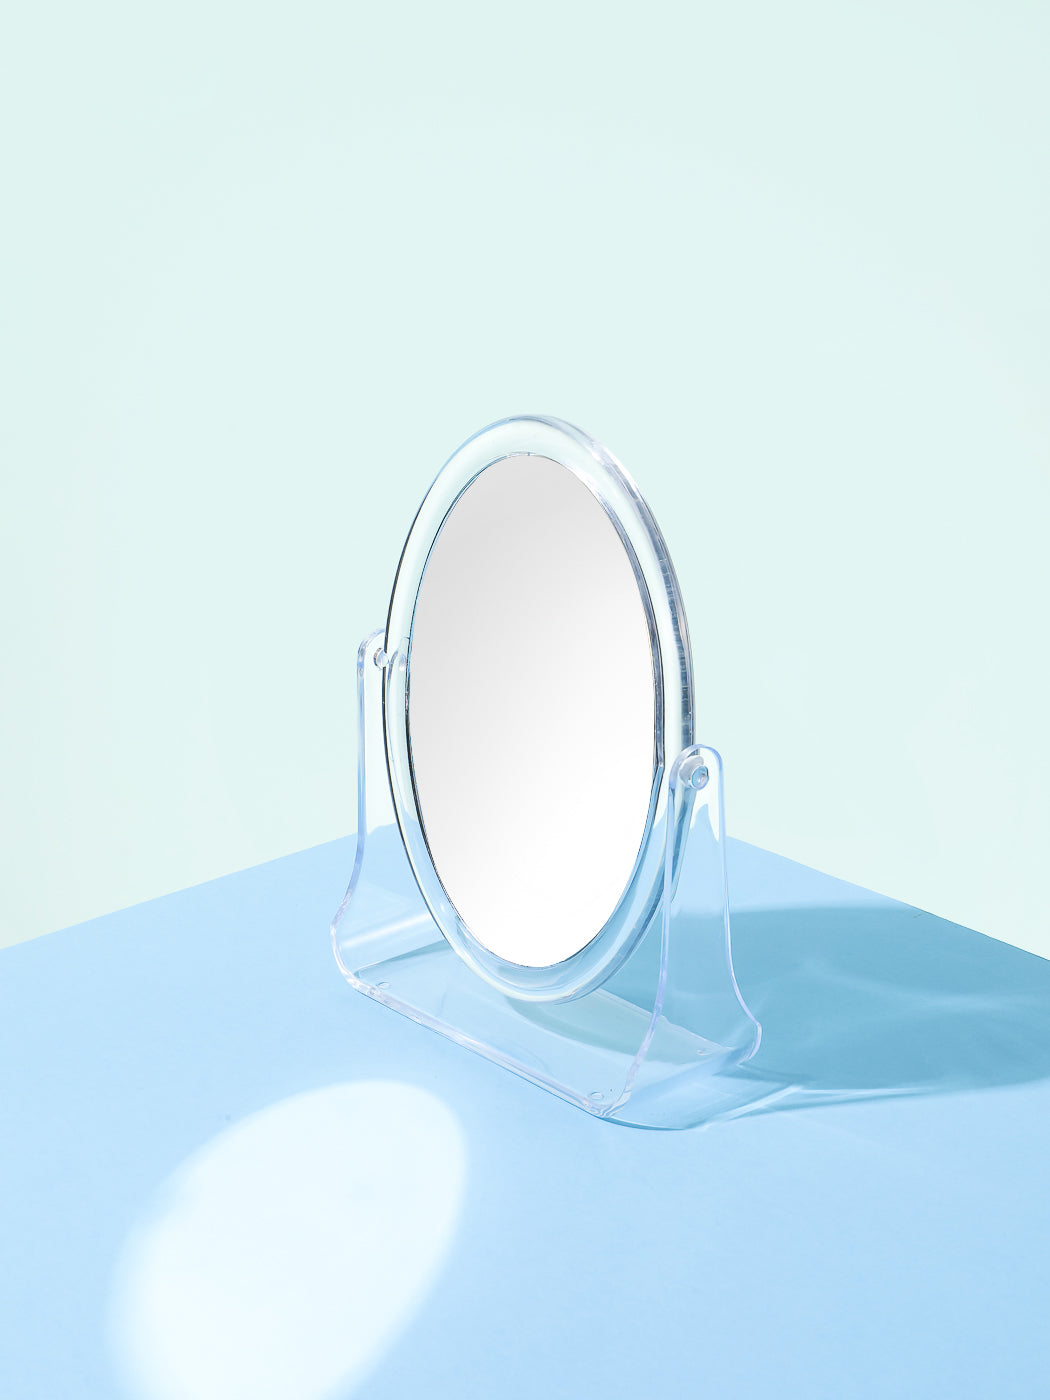 MINISO OVAL DOUBLE SIDED ROTATION VANITY MIRROR (2×MAGNIFICATION) 2010216810100 TABLE MIRROR-3